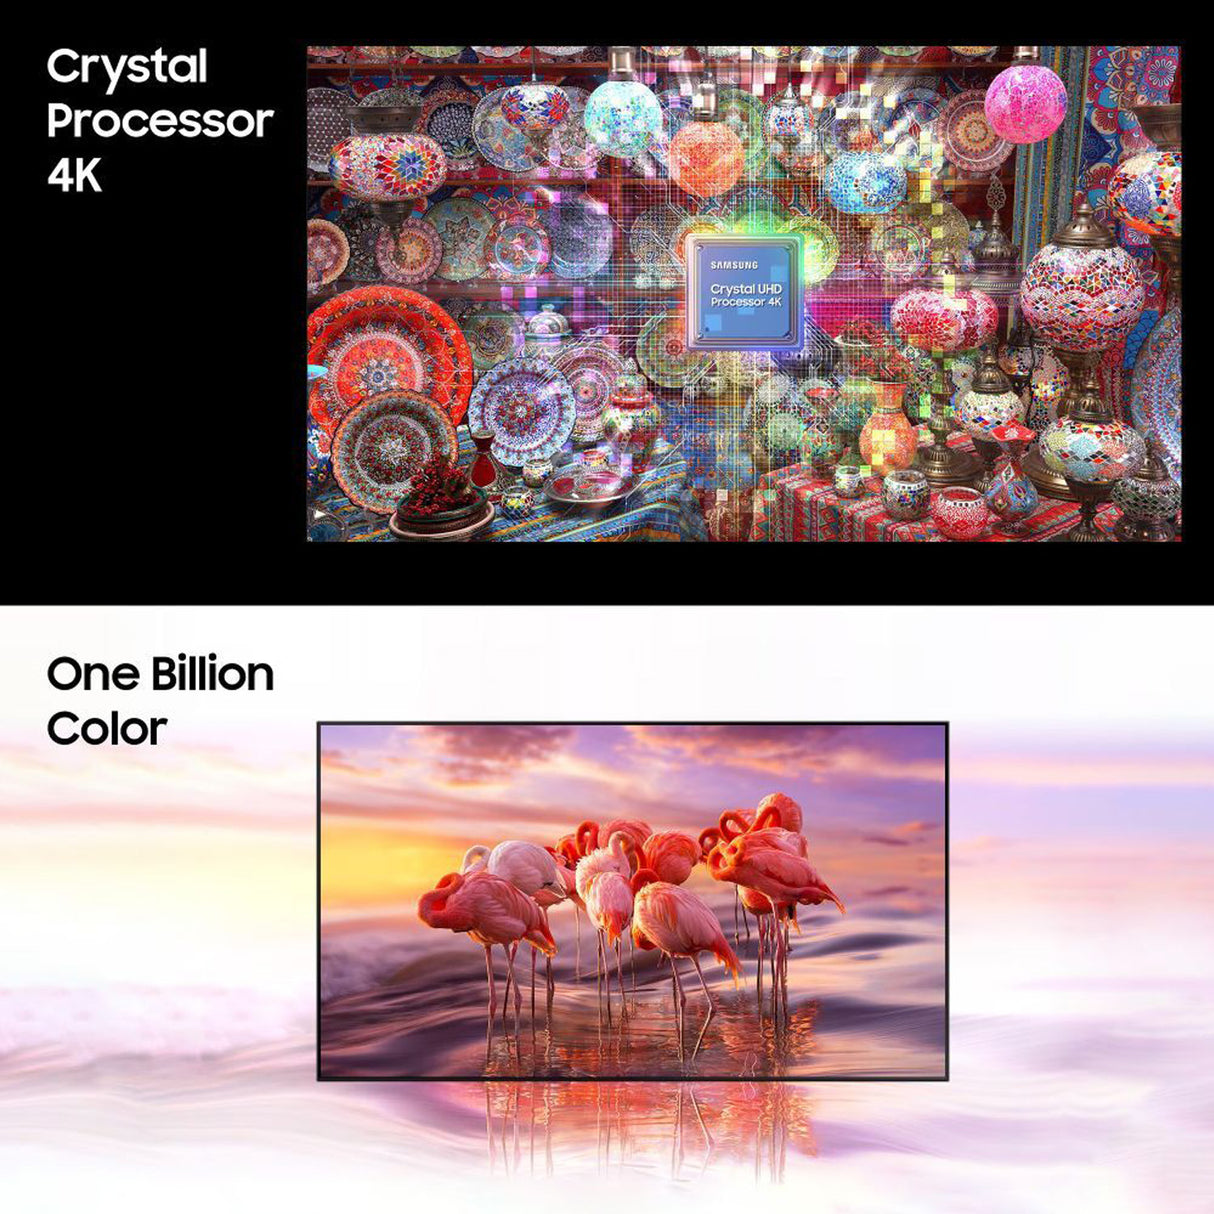 CU7700 Smart TV: A blend of intelligence and clarity in a 75" display.